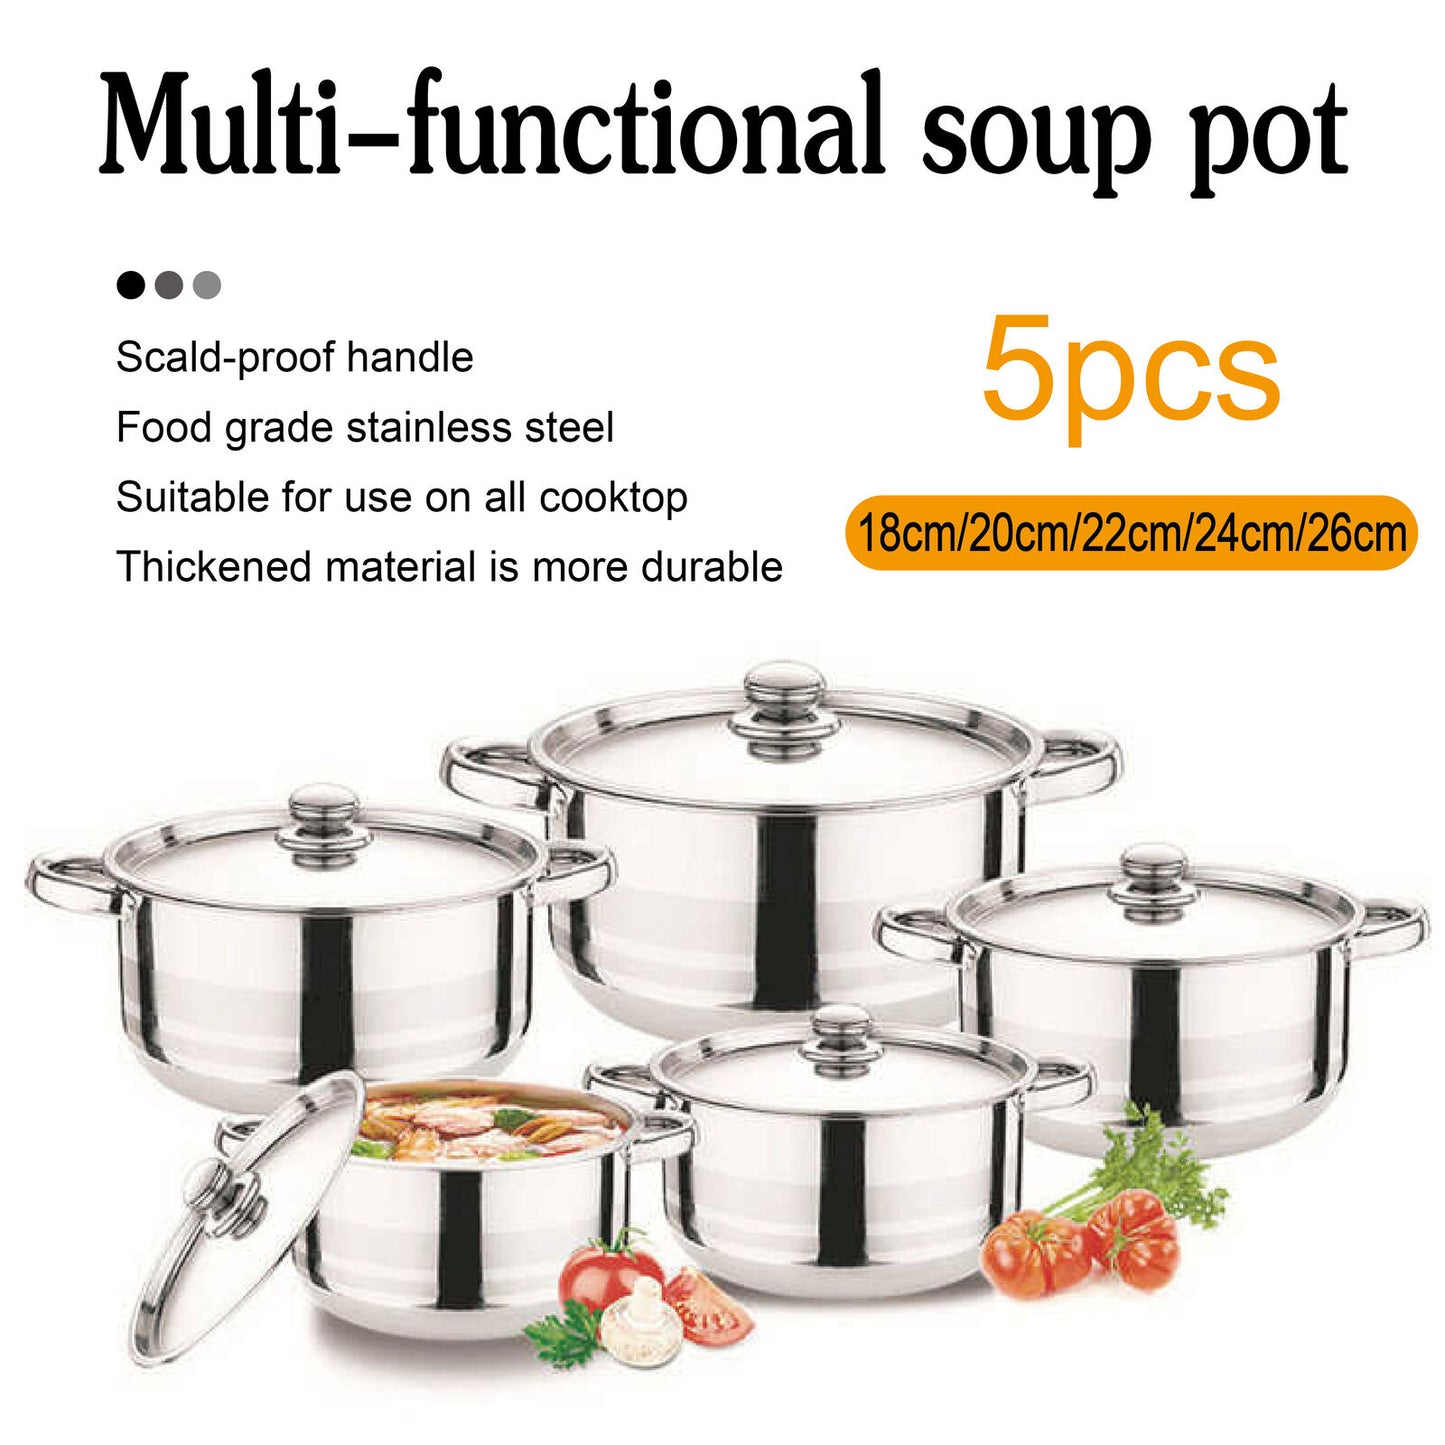 5pcs Stainless Steel Stock Pot with Lid Cooking Kitchen Cookware Stockpot Set